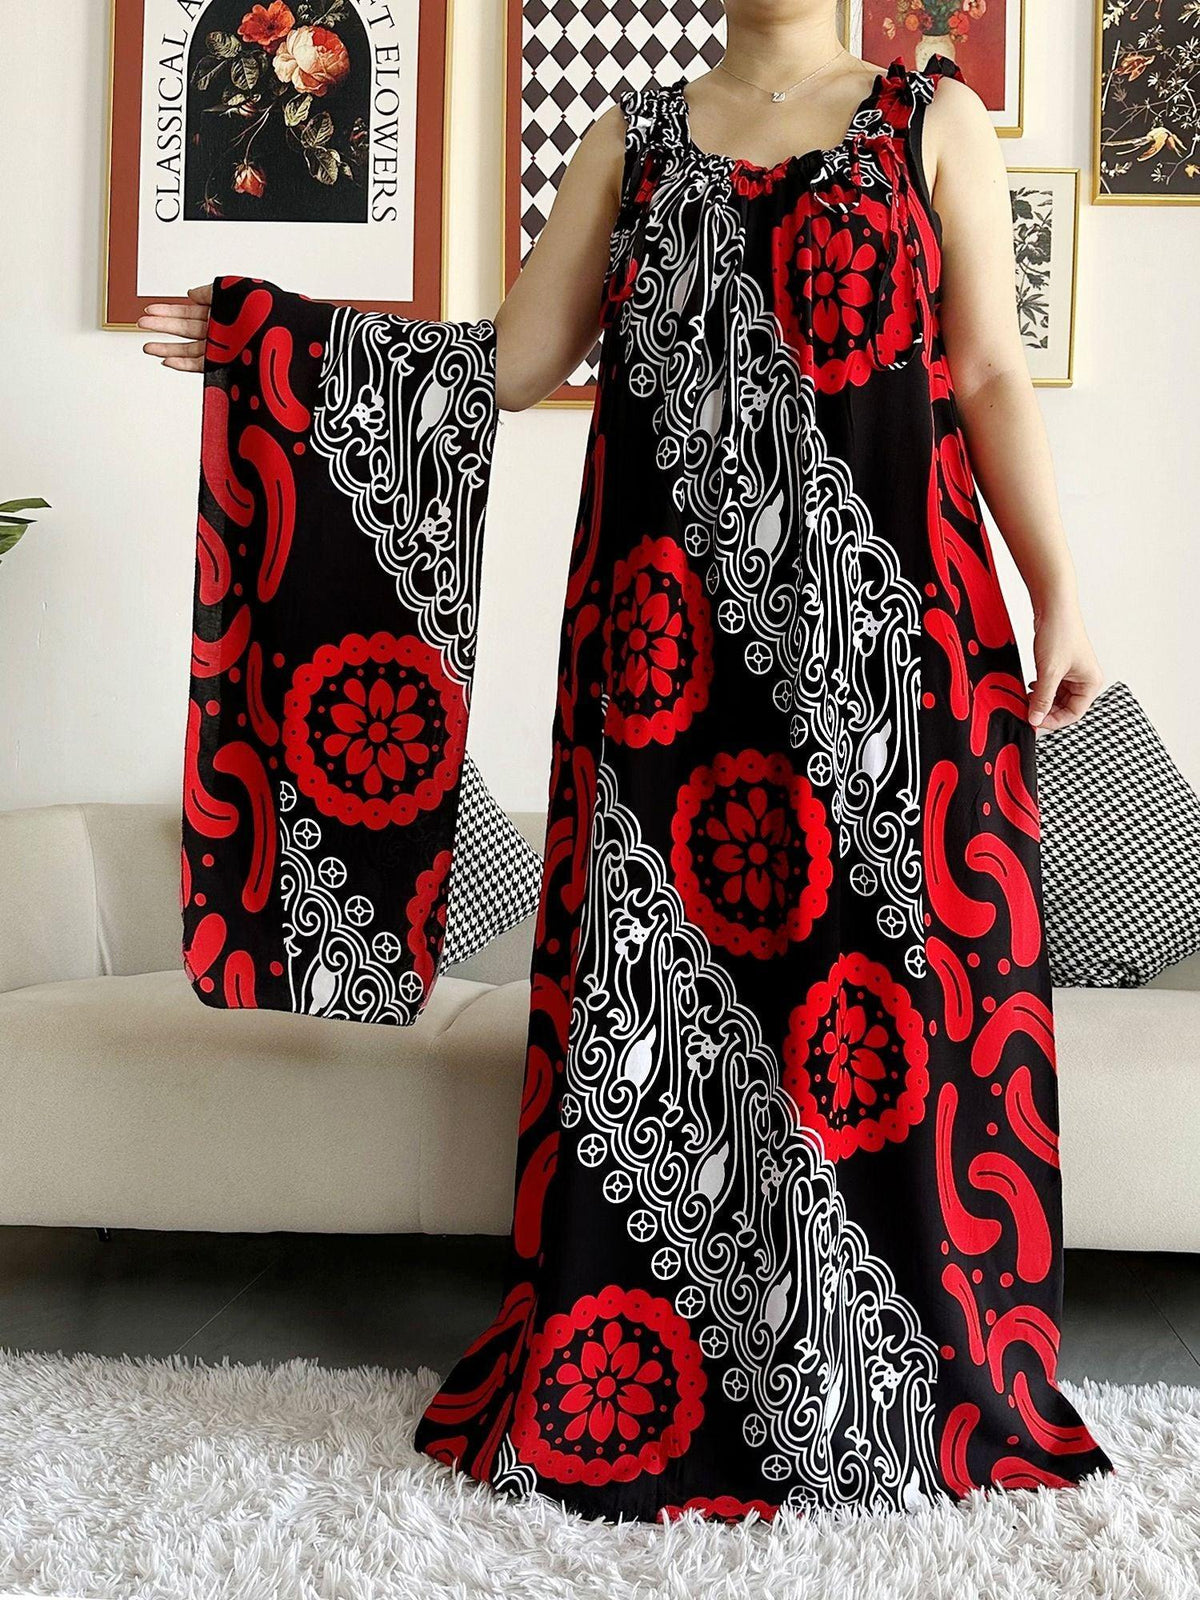 On sale - Cotton Summer African Kaftan - 16 Colours - Free